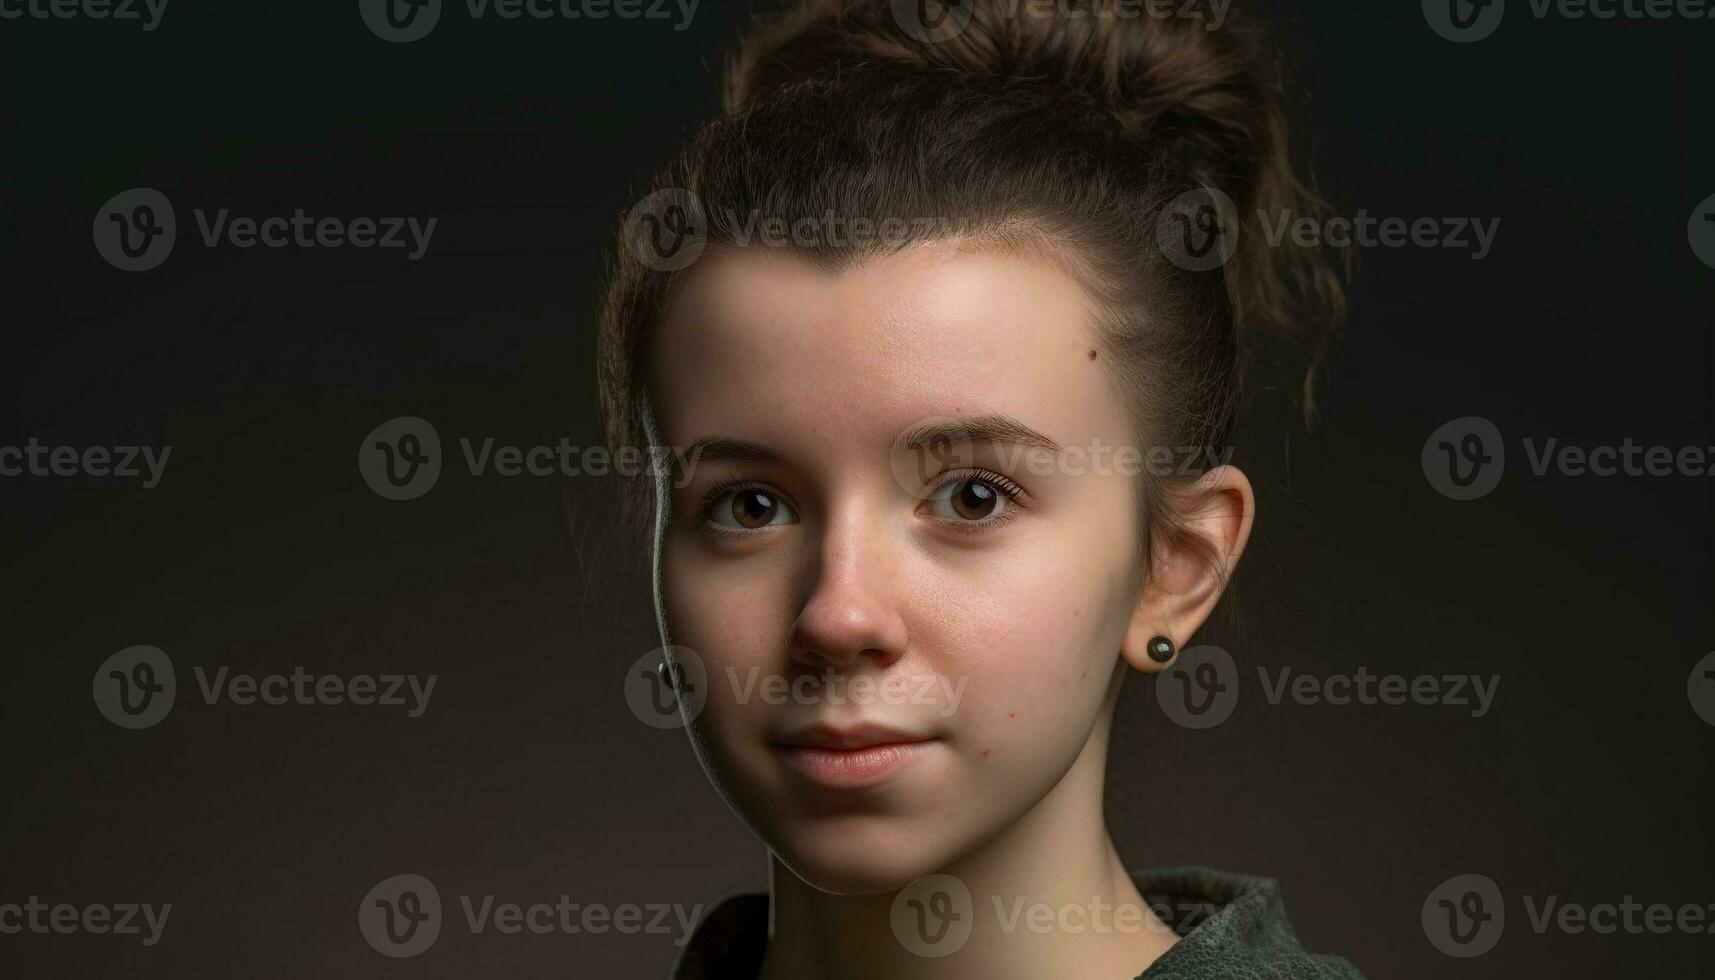 Cute Caucasian child with brown hair smiling for headshot portrait generated by AI photo